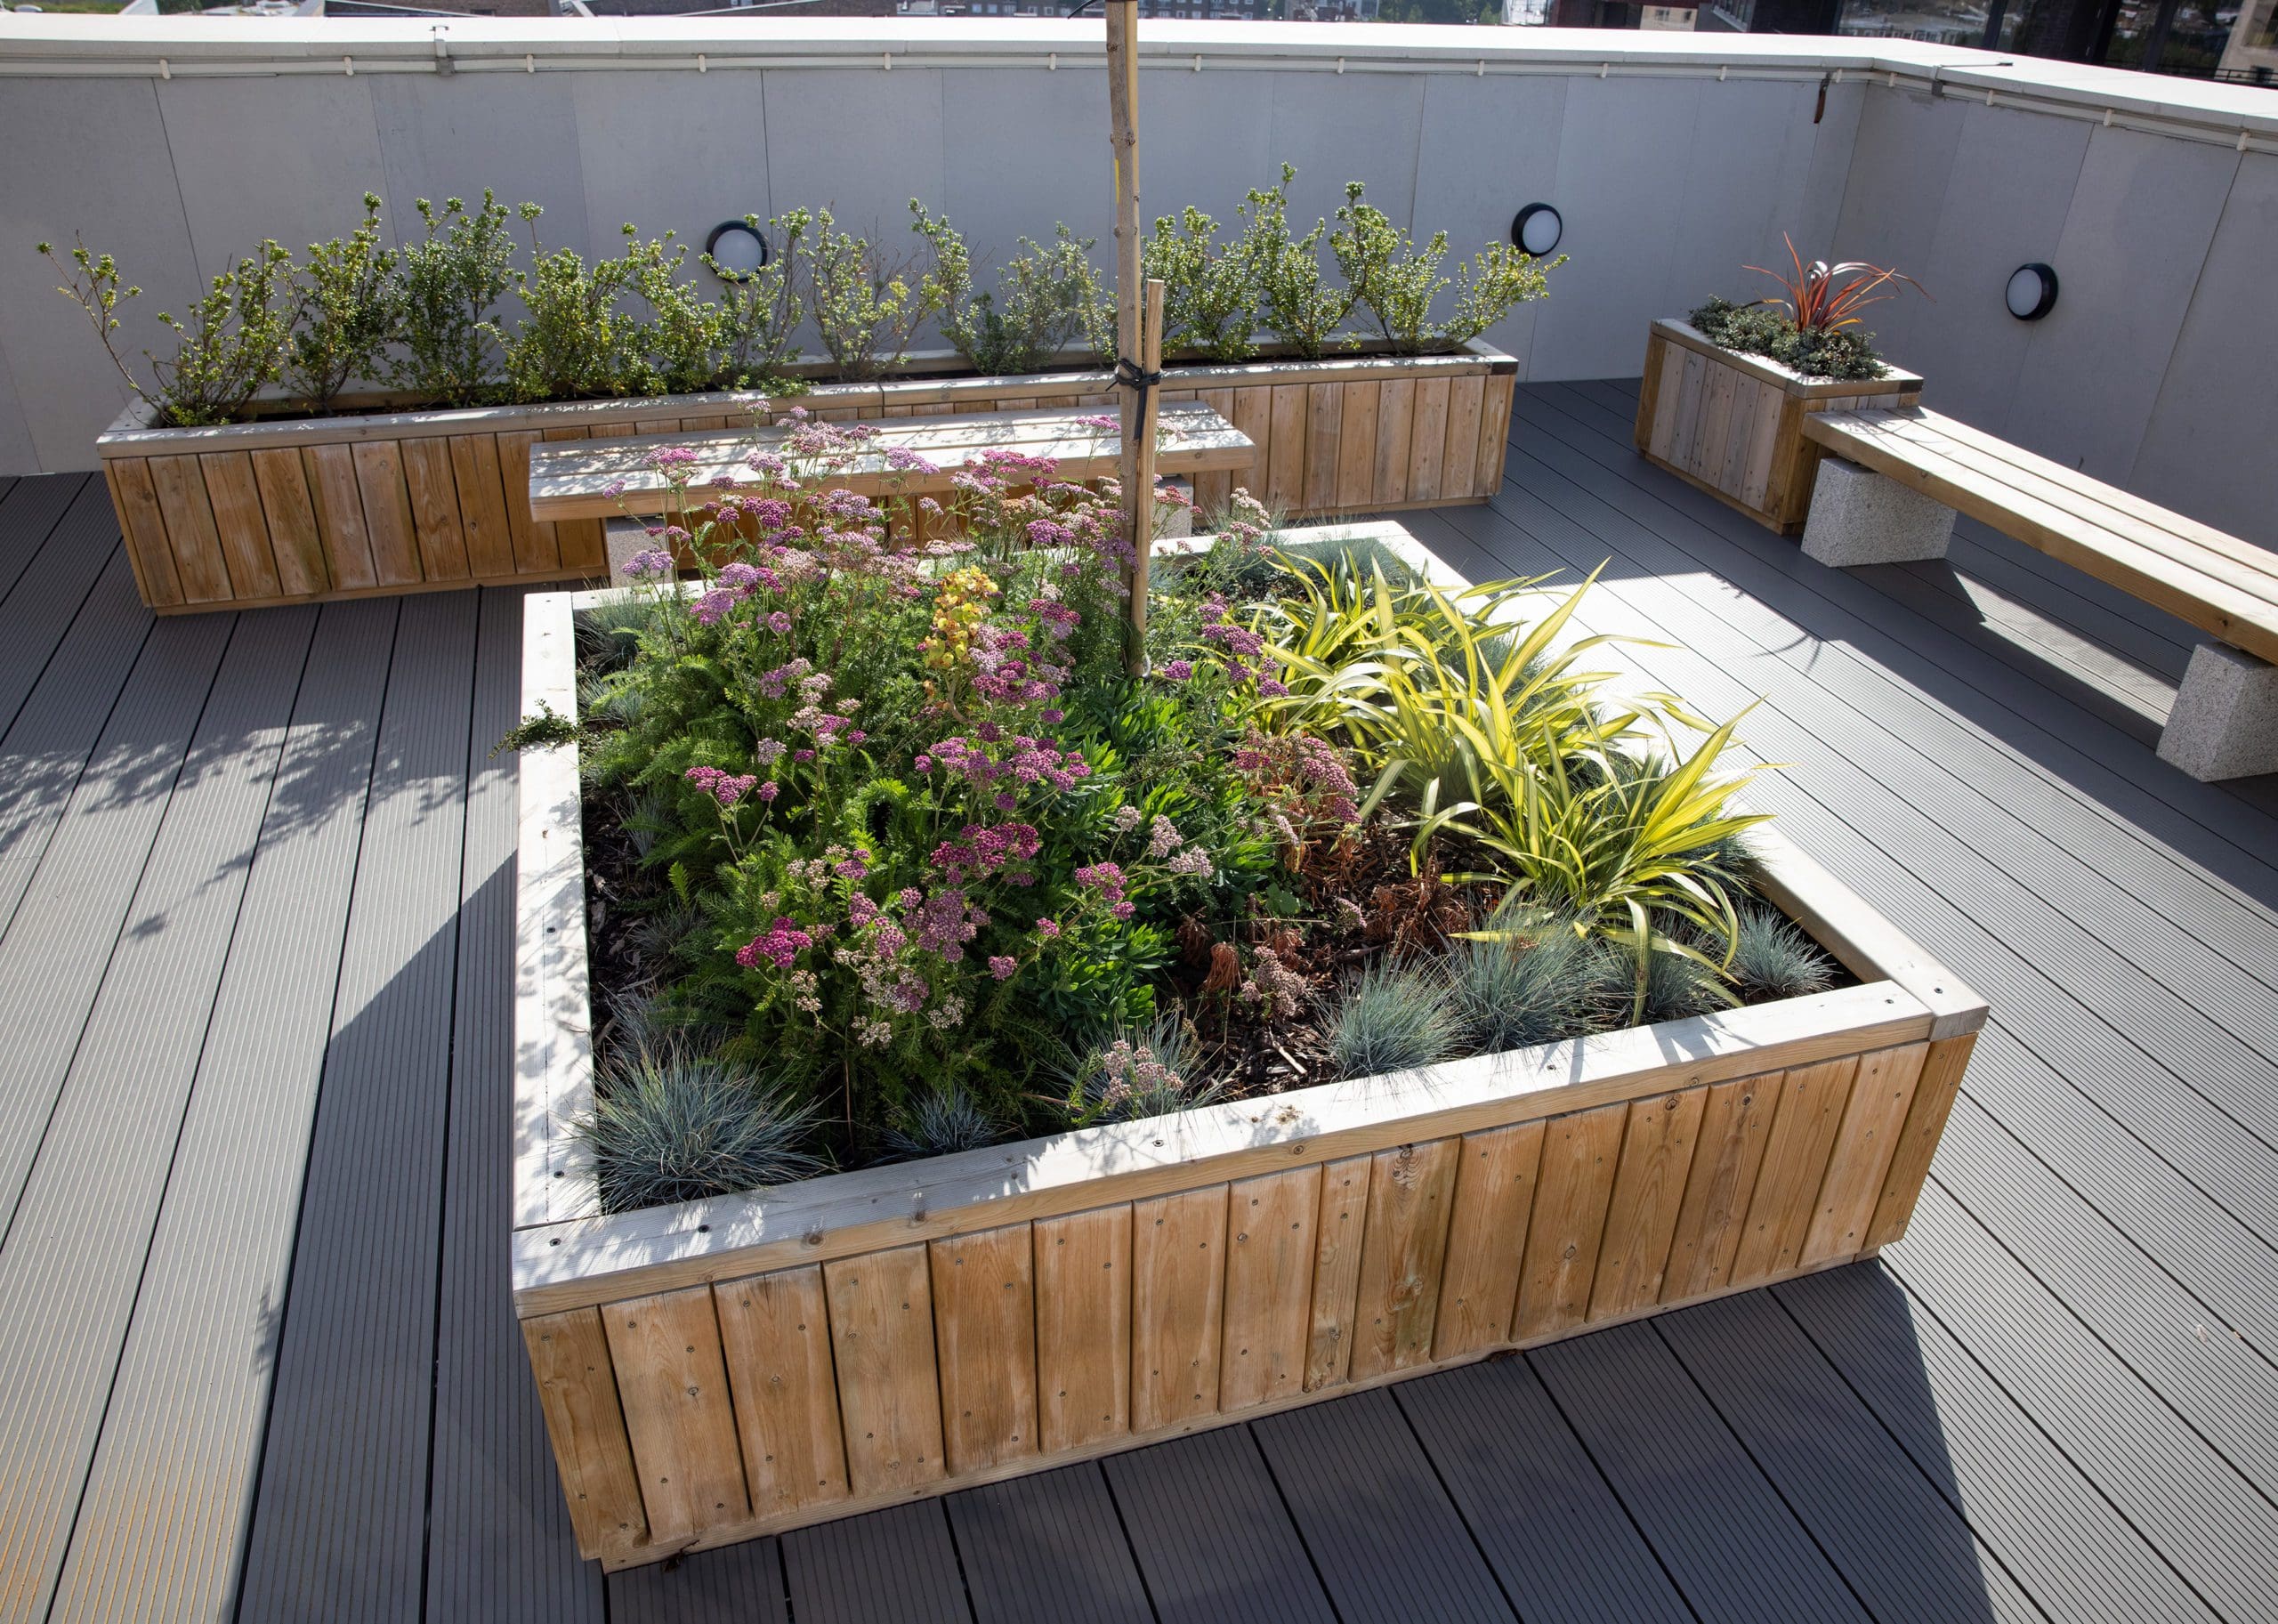 centre piece wooden raised planter filled with bushes and small tree surrounded by benches and smaller planters on building rooftop